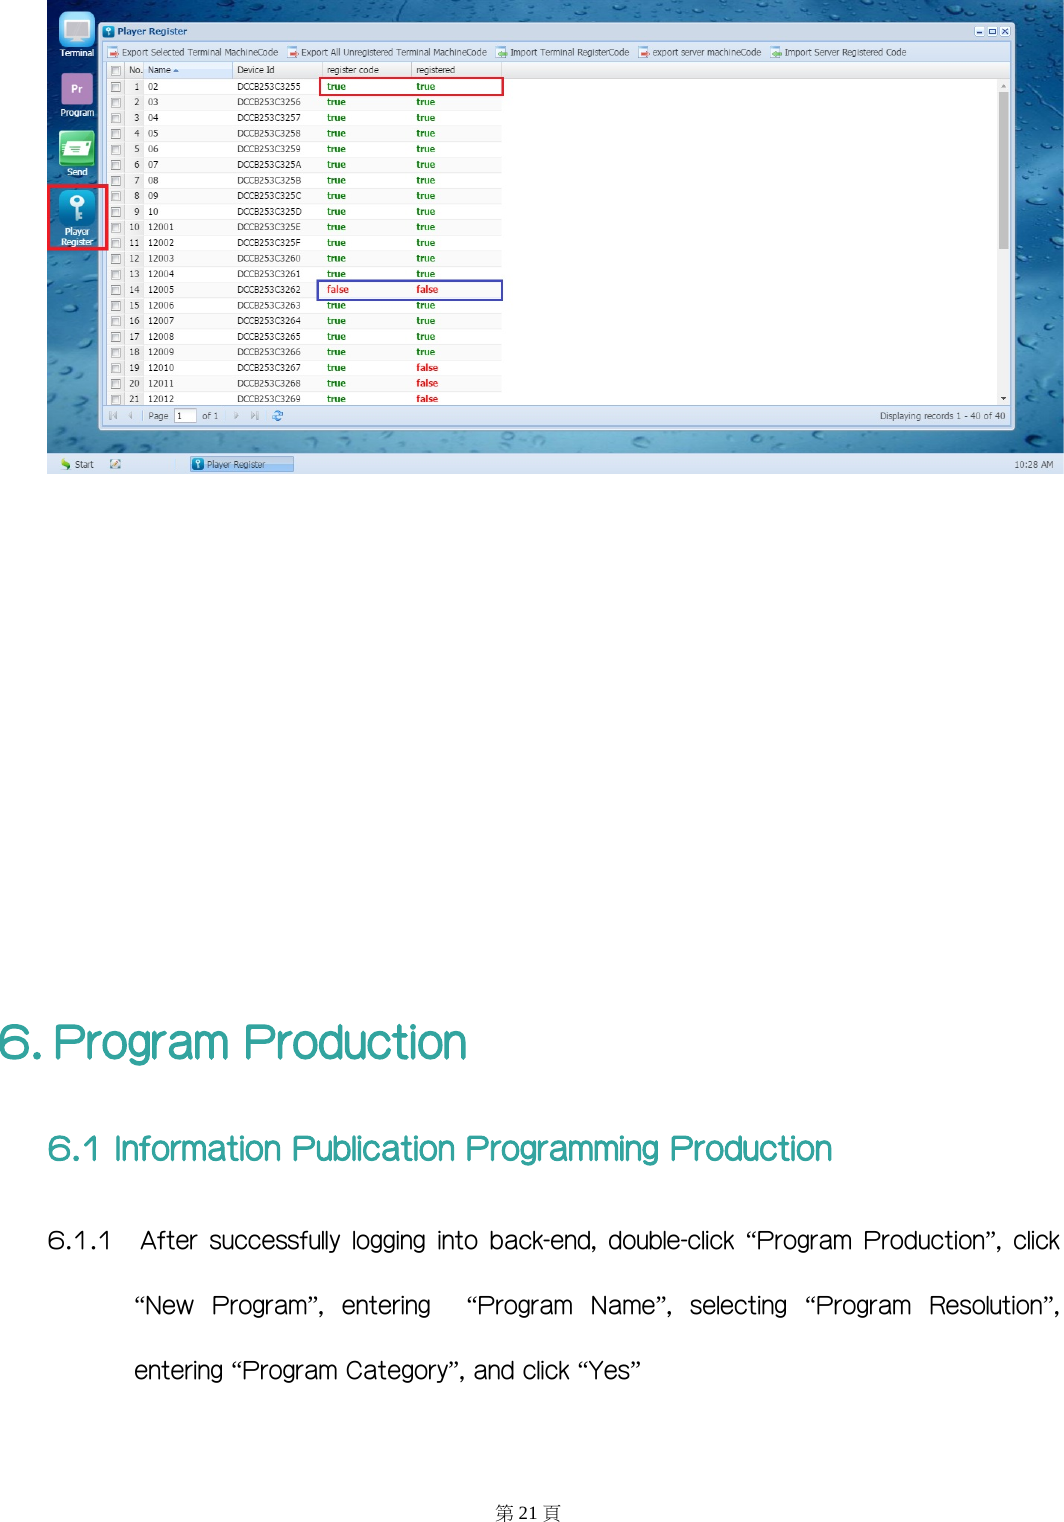            6. Program Production 6.1 Information Publication Programming Production 6.1.1  After  successfully  logging  into  back-end,  double-click “Program  Production”,  click “New  Program”,  entering    “Program  Name”,  selecting  “Program  Resolution”, entering “Program Category”, and click “Yes” 第21 頁 